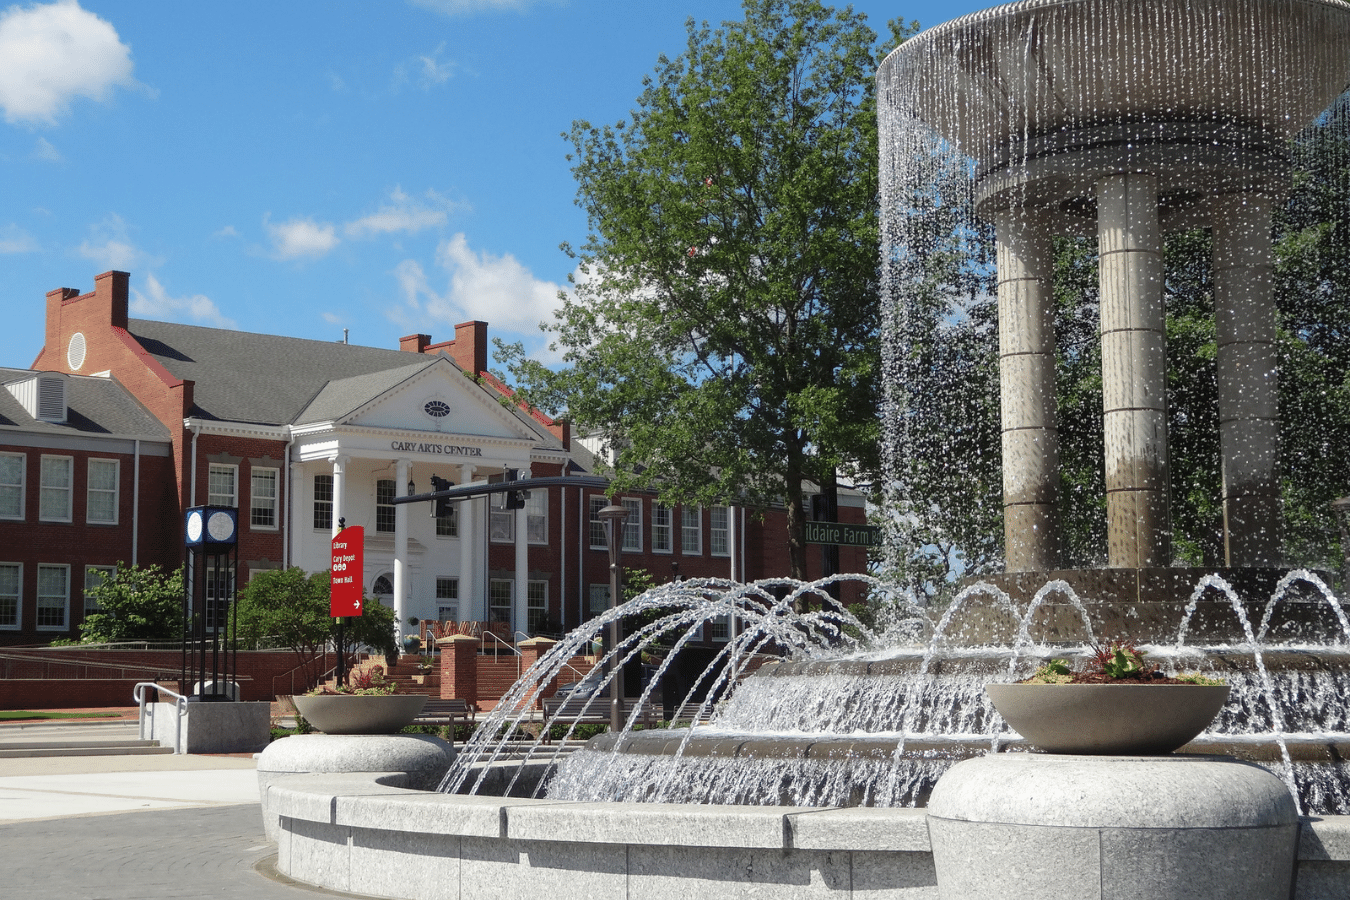 Downtown Cary, NC Arts Center